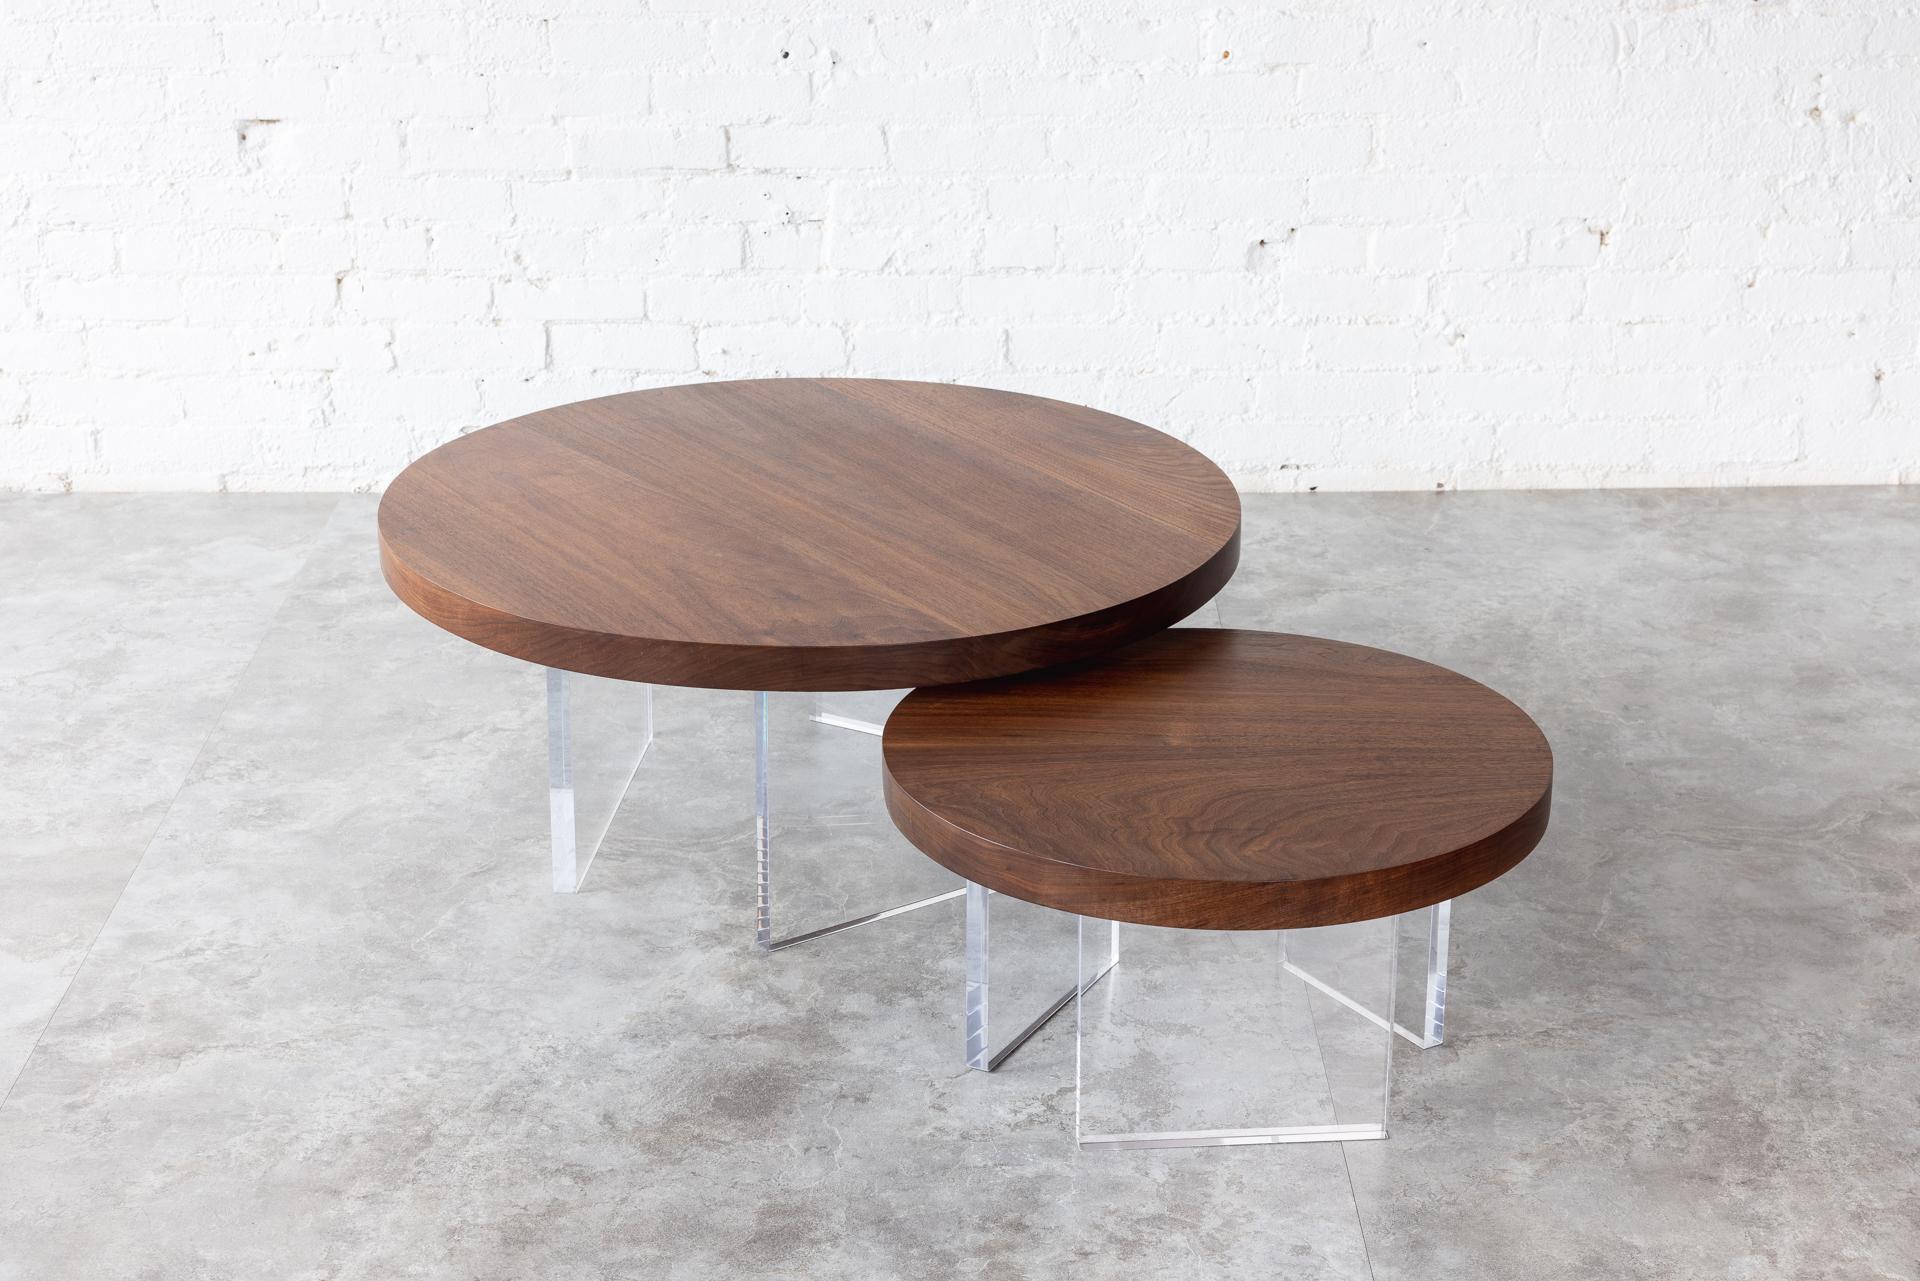 The Constantinople Round coffee table set is a modern wood and acrylic coffee table in Black Walnut that provides a warm feel with a touch of brilliance. The tabletop sits on three acrylic one-inch thick legs that allow light to pass through for an